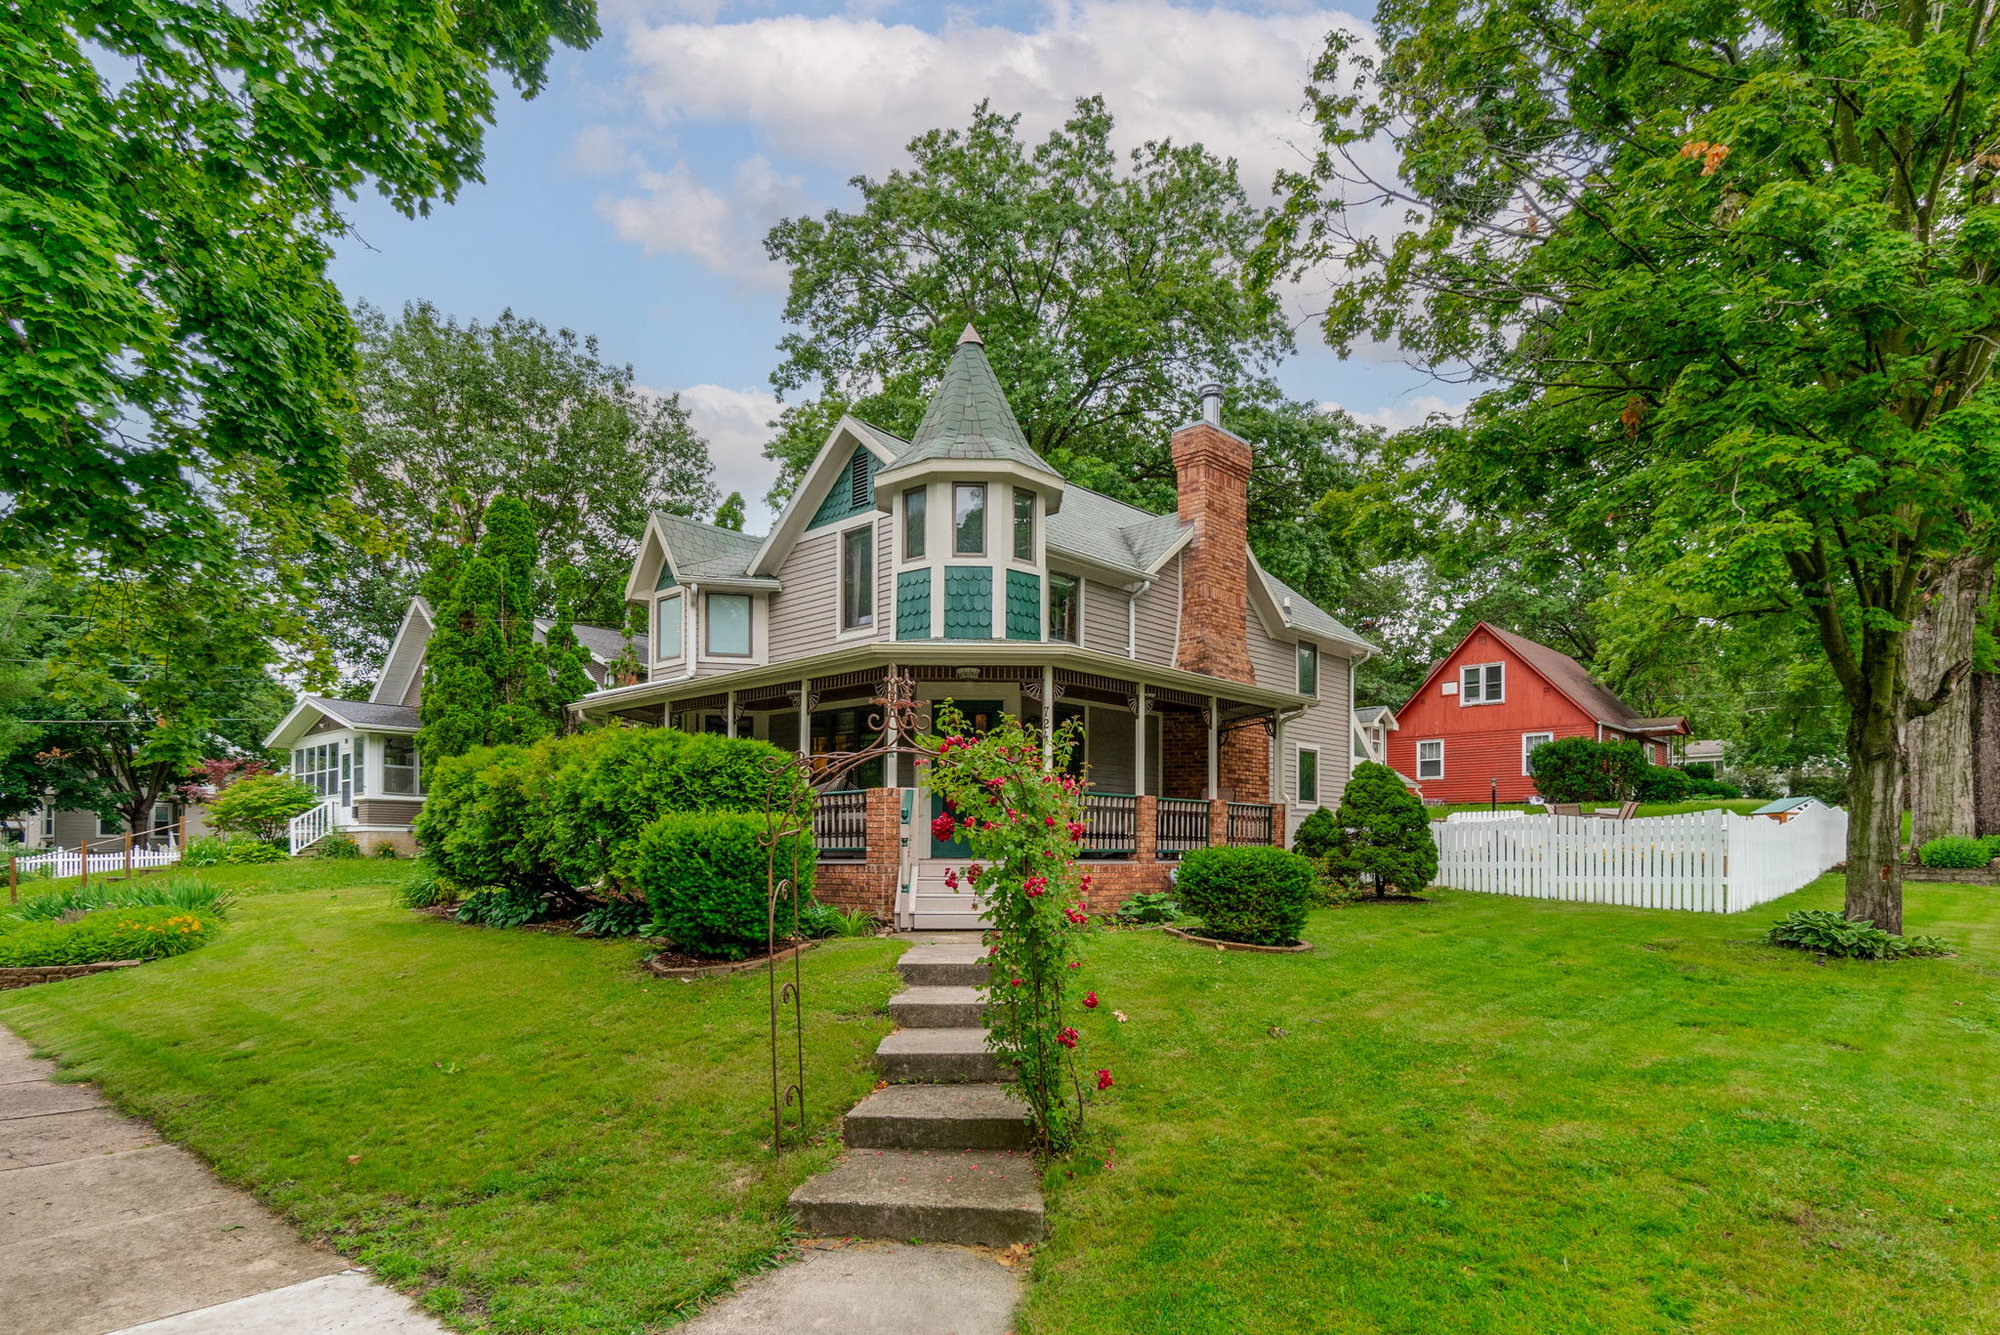 This Iconic Cedar Falls Home That is Teeming with Character and Bursting with Curb Appeal Could be Yours!